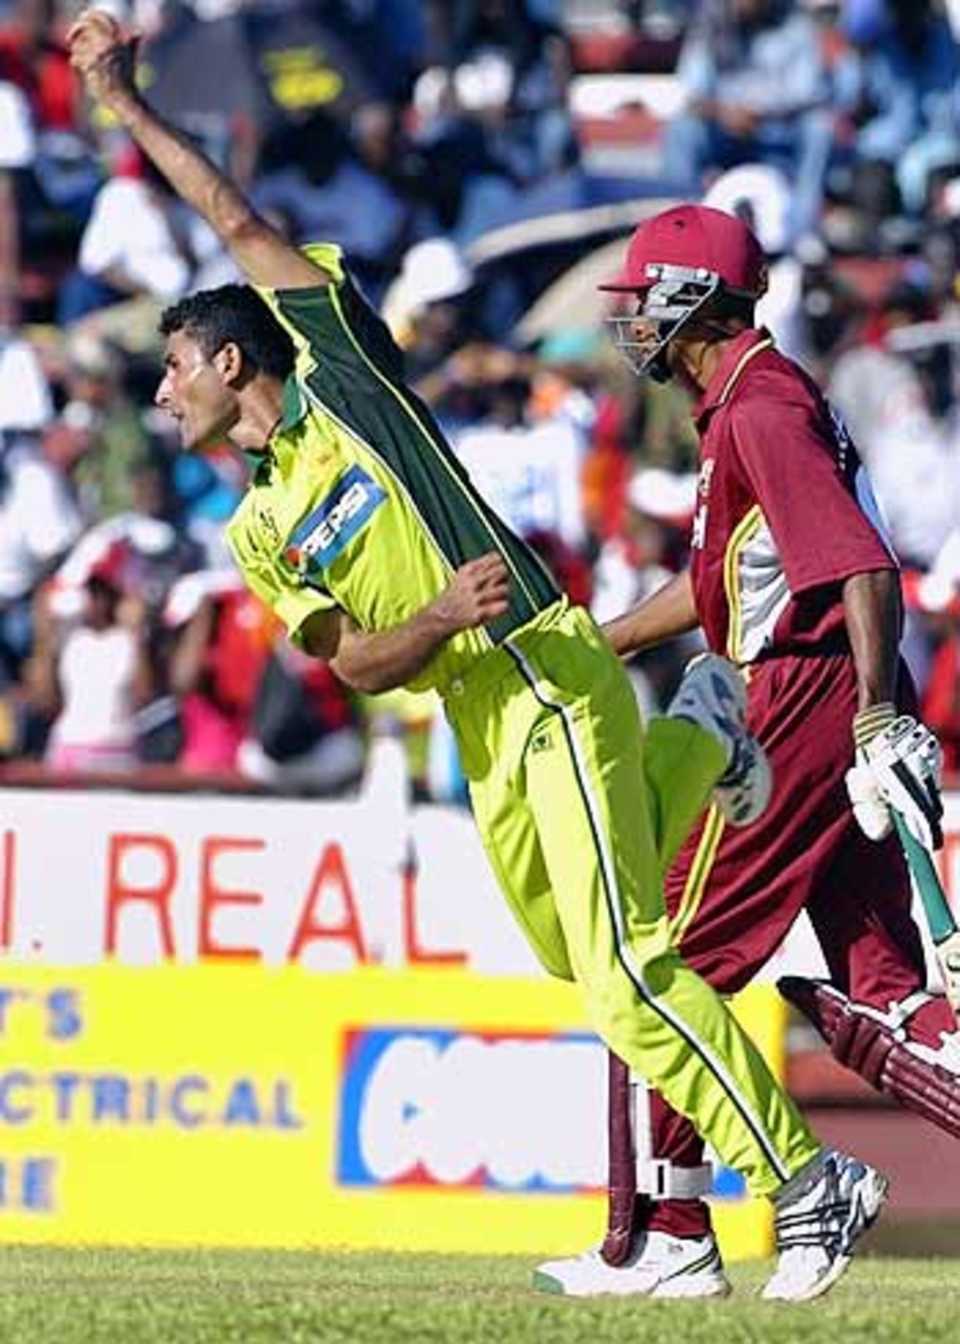 Abdul Razzaq runs into bowl during his matchwinning performance of 4 for 29, West Indies v Pakistan, 1st ODI, St Vincent, May 18, 2005